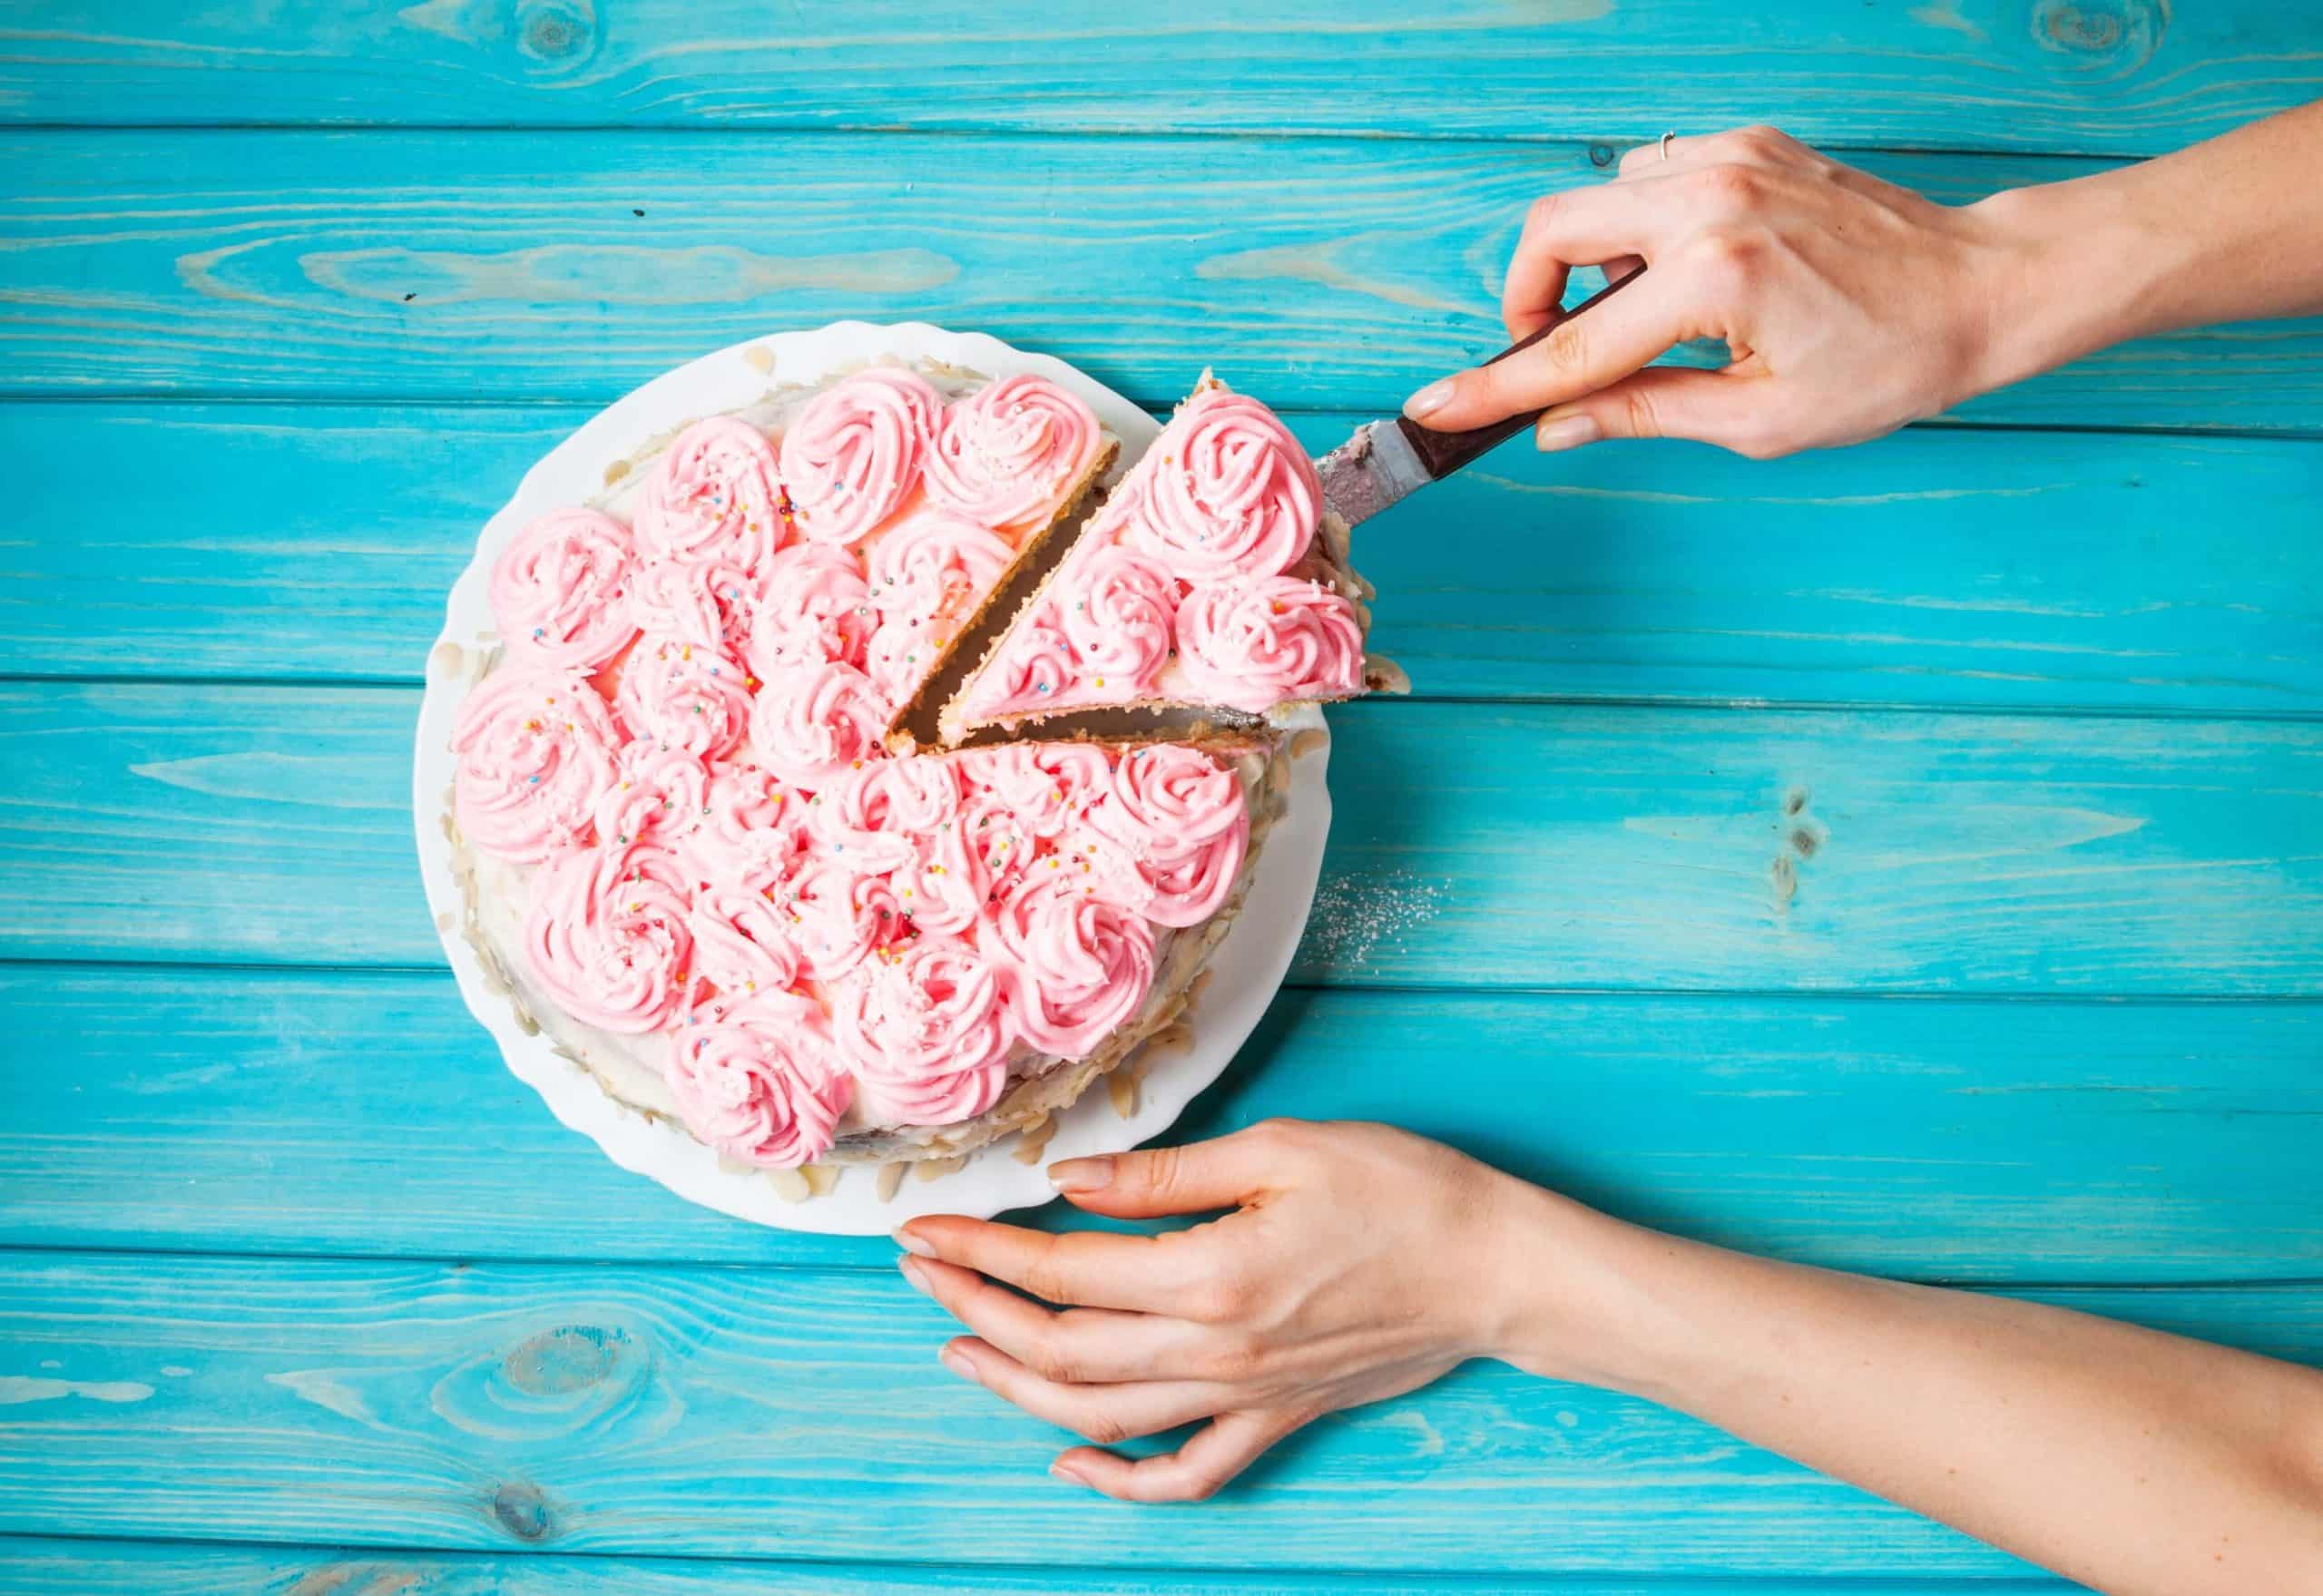 The Right Way to Cut a Round Cake - FNP - Official Blog